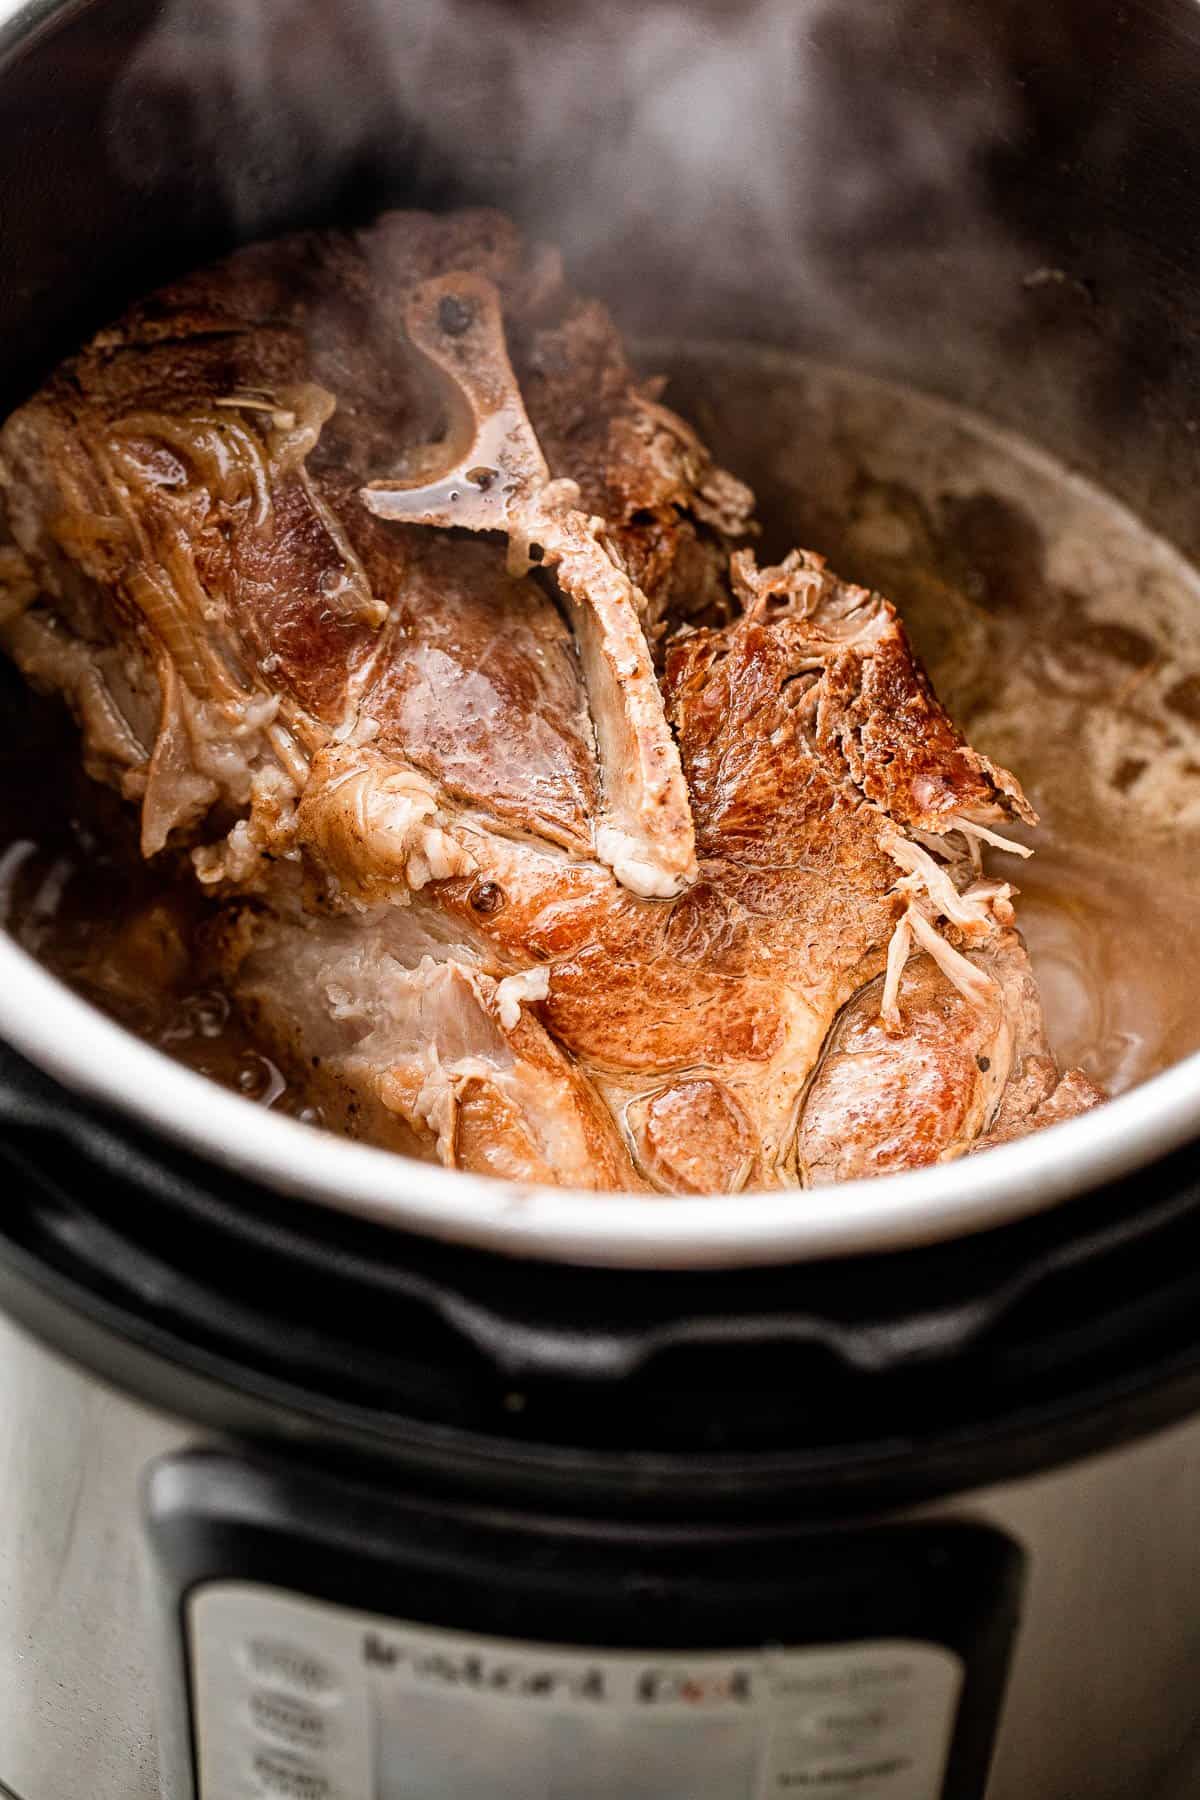 shot of a pork shoulder inside the instant pot and steam coming out of the meat.